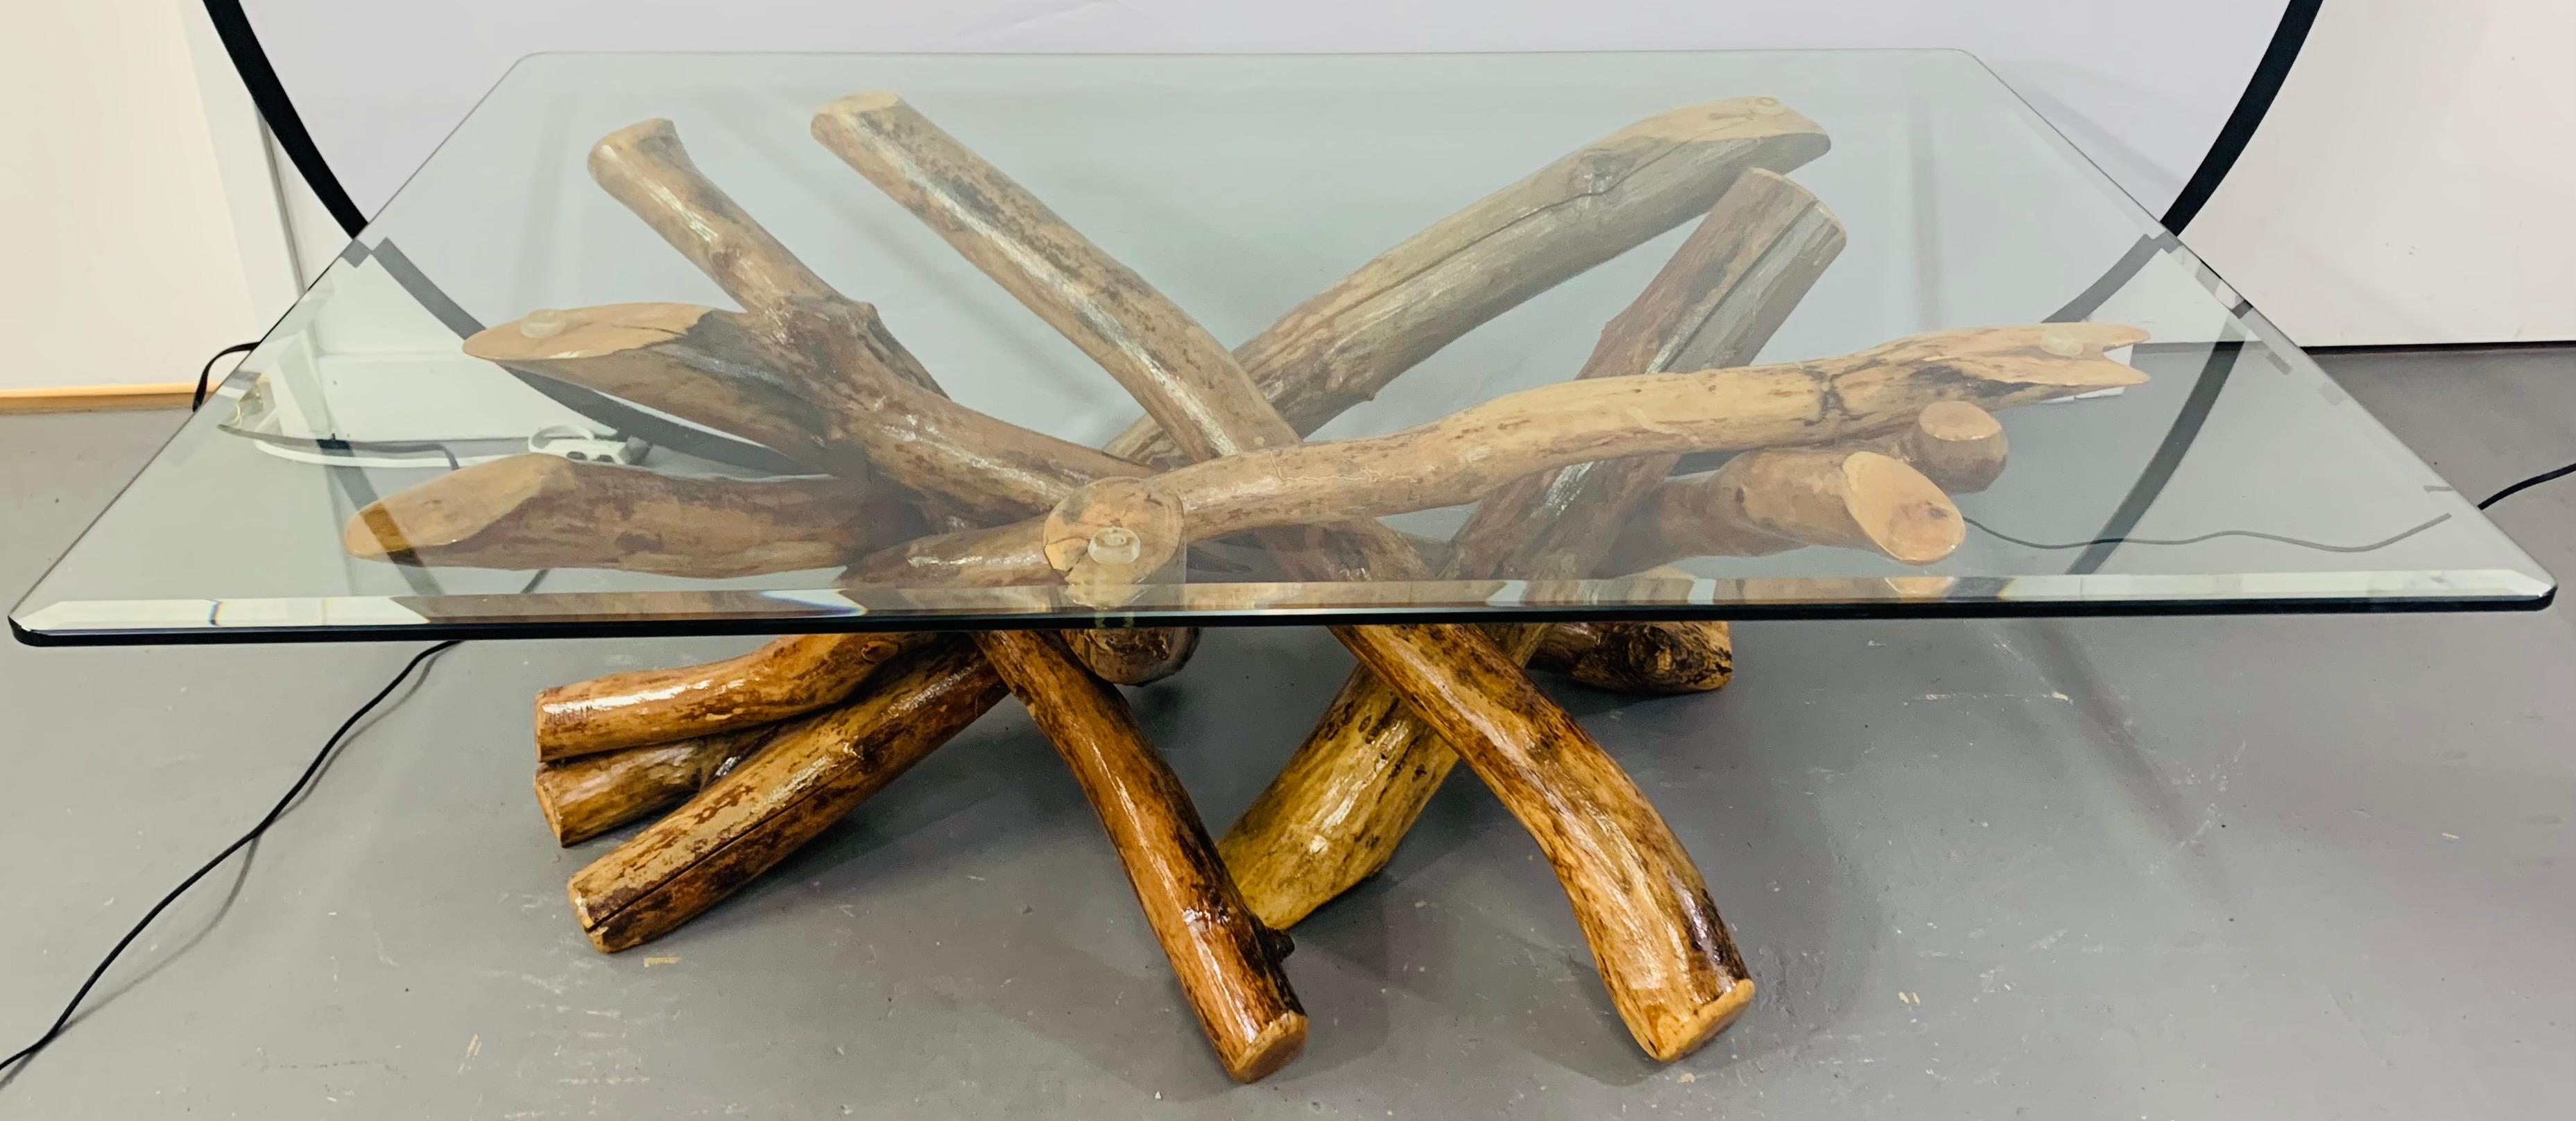 A rustic natural wood base coffee or cocktail table in an organic design fashion. This amazing table features veneered maple wood twist logs put together in an intertwining manner to present an artistic wood sculpture as the table base and a heavy